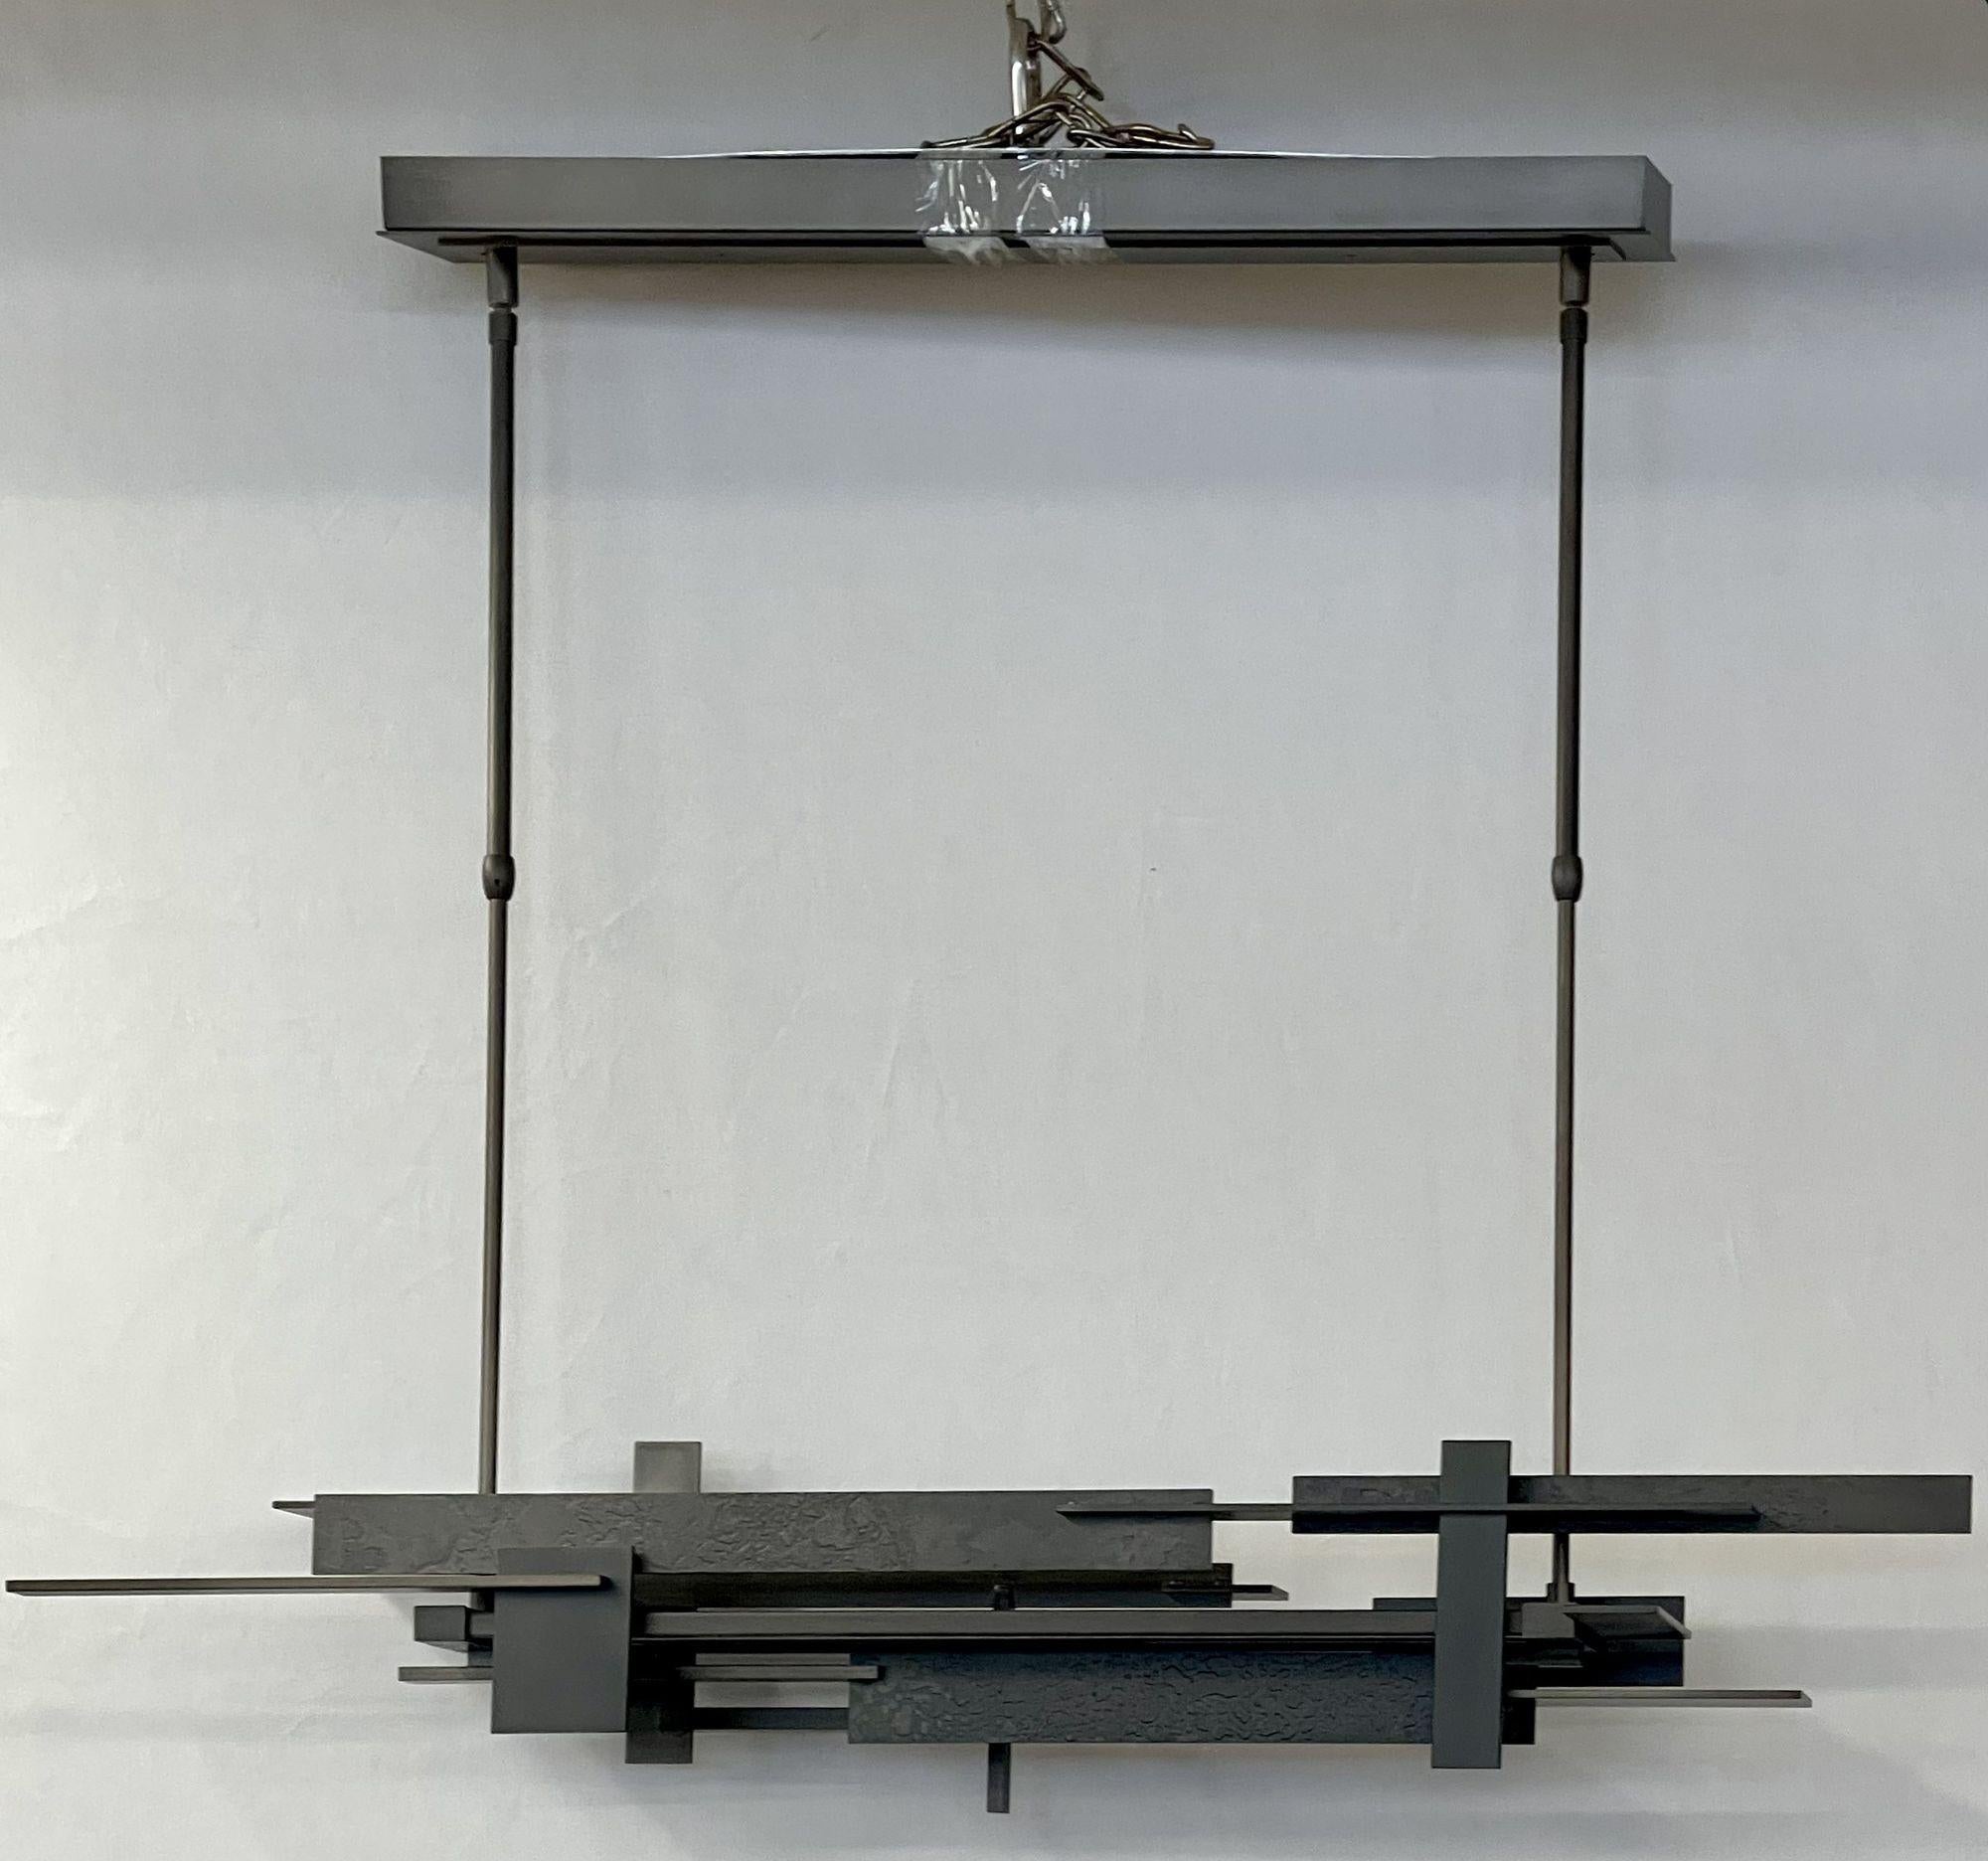 Hubbardton Forge Planar linear chandelier, dark smoke pendant ceiling light, LED, 2000s
 
Influenced by Frank Lloyd Wright's visionary Fallingwater home from the 1930s, the horizontal Planar LED Pendant delivers clean, modern, gravity-defying